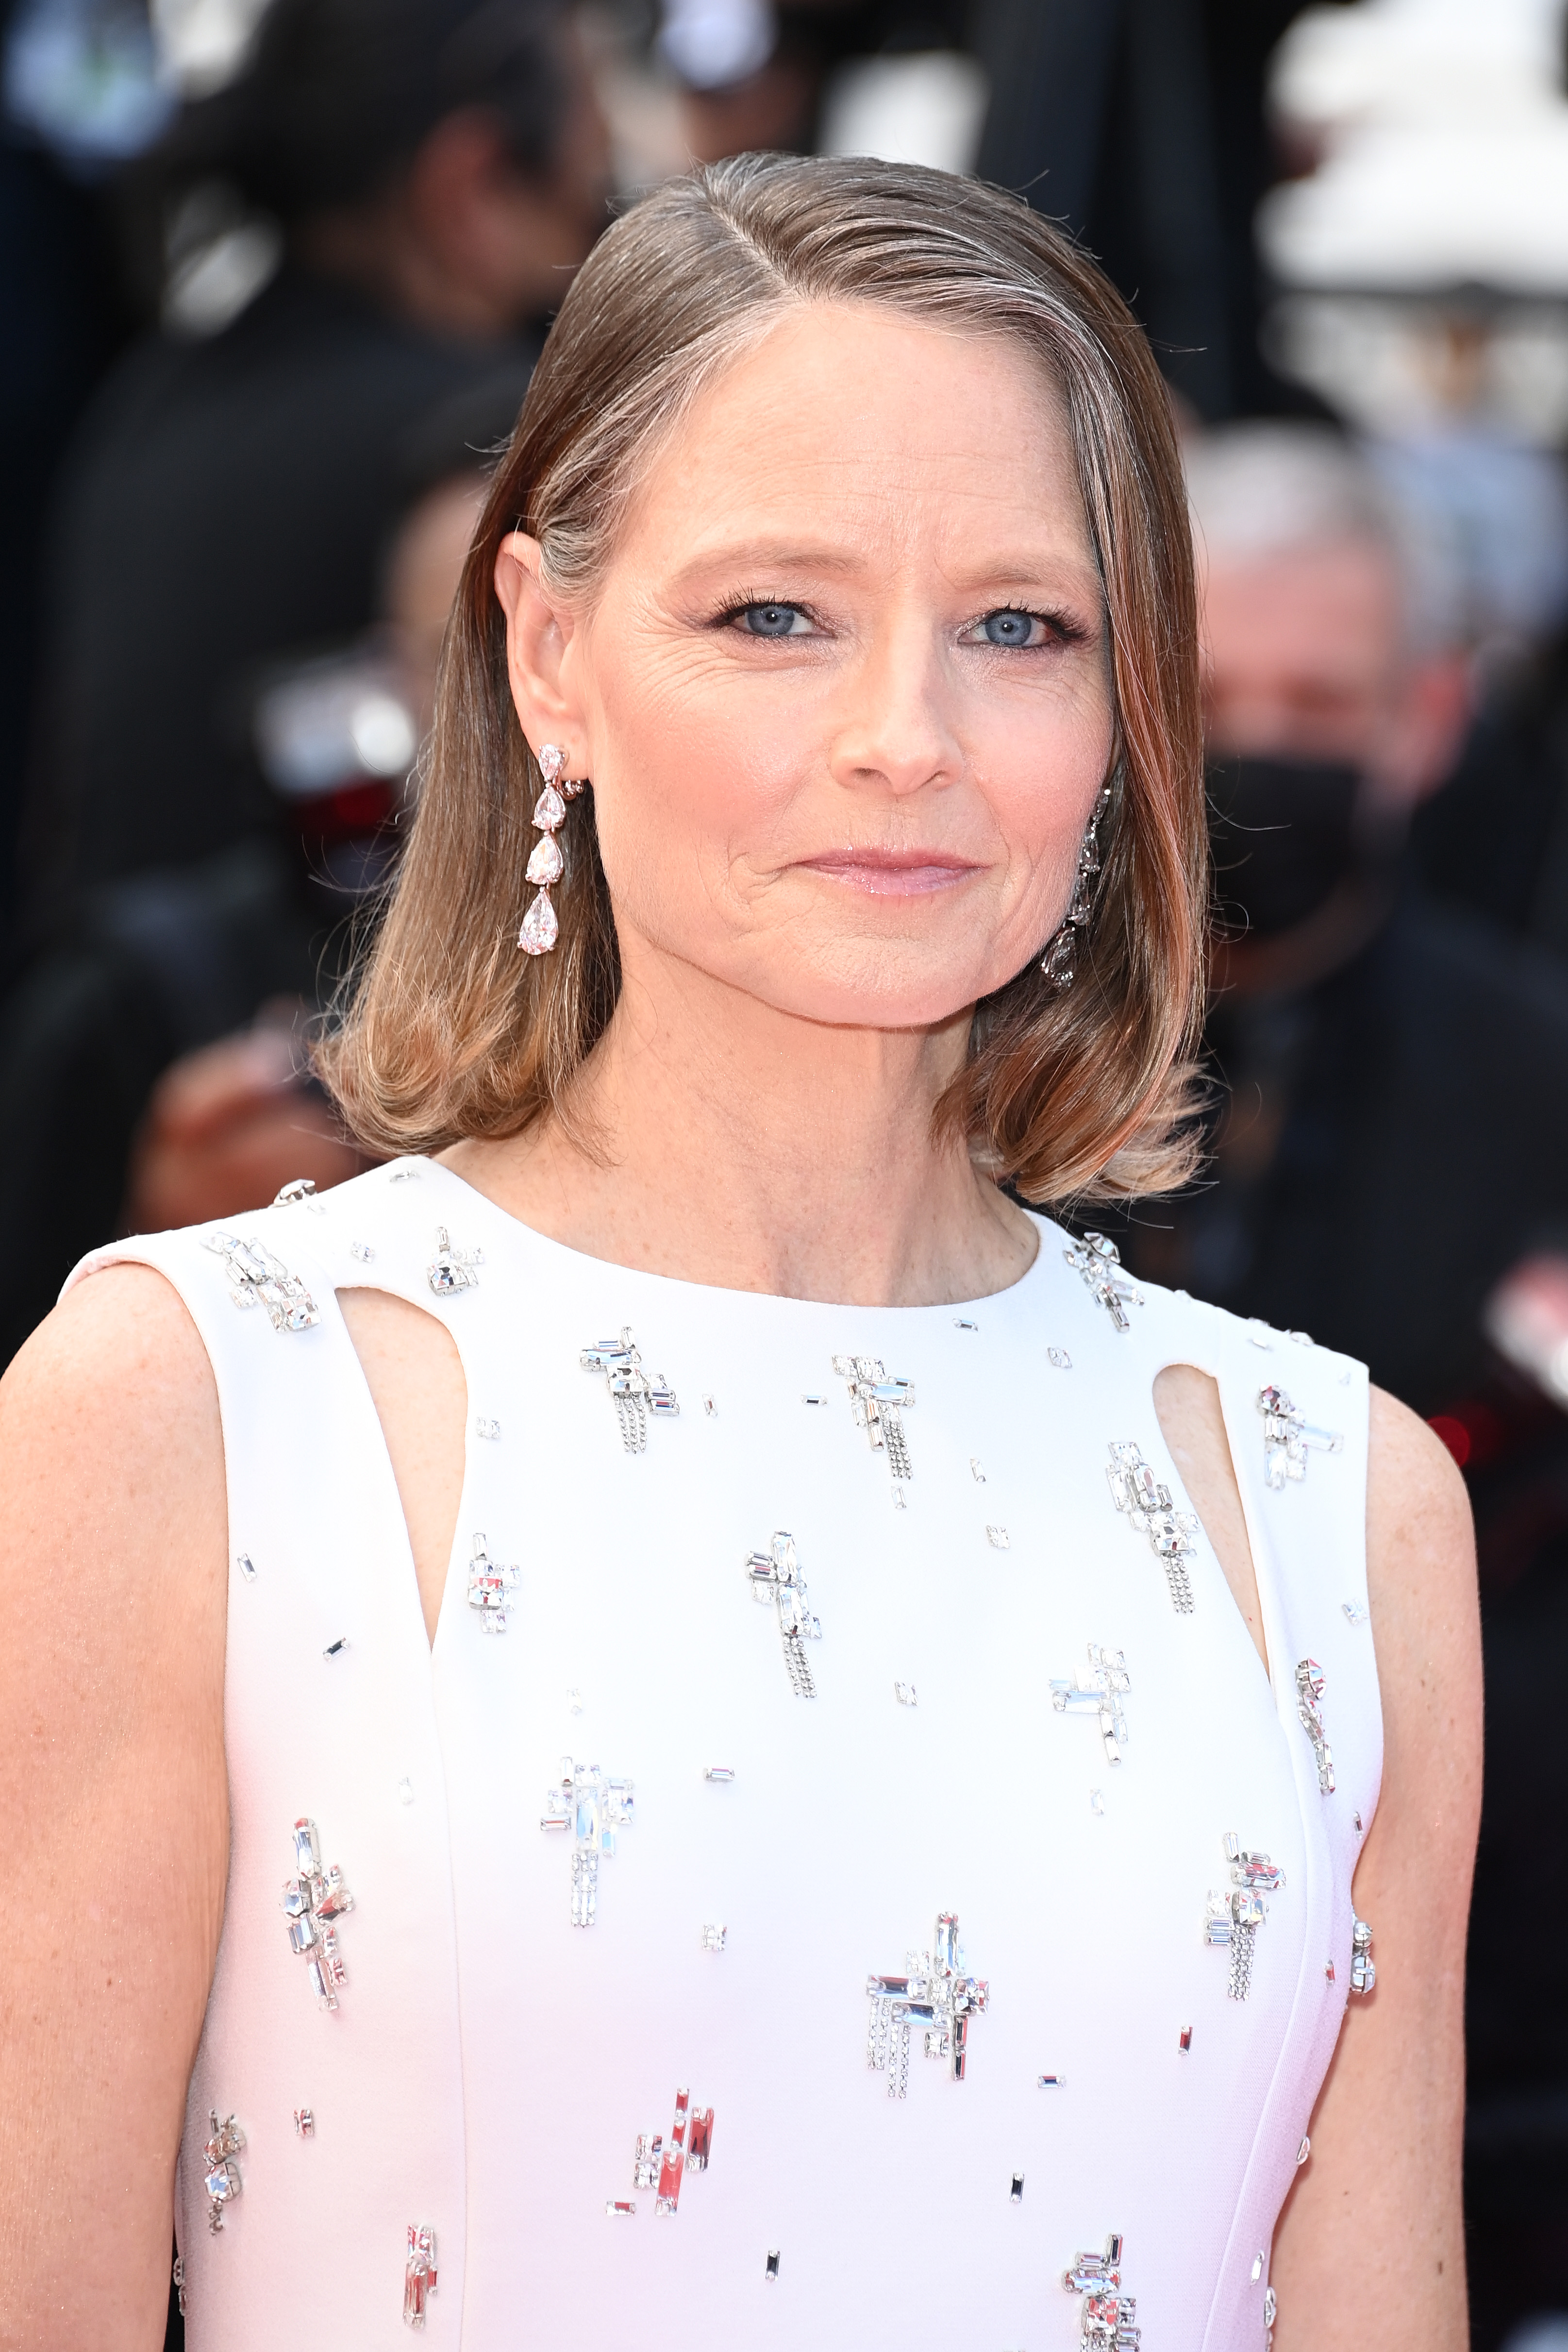 Jodie Foster attending the "Annette" opening ceremony at the 74th Annual Cannes Film Festival in France, 2021 | Source: Getty Images